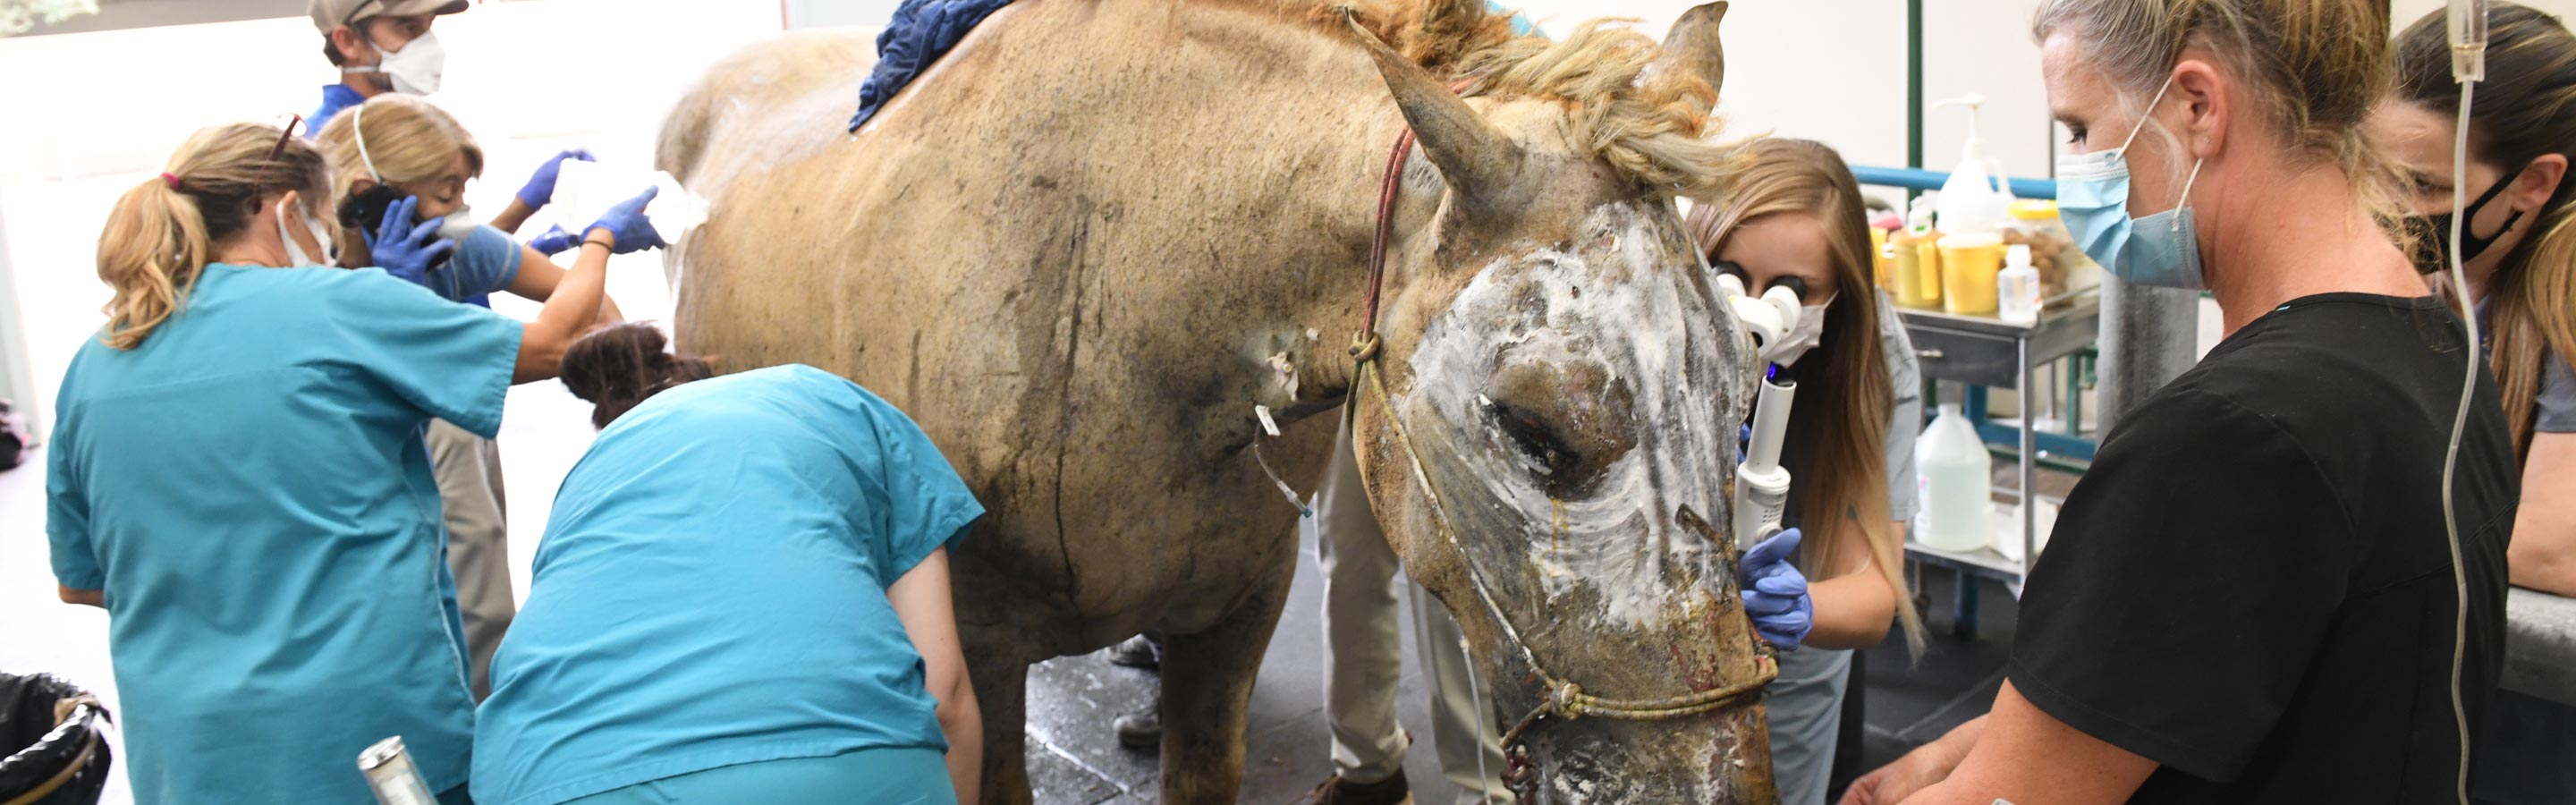 Horse being treated for wildfire burns by California veterinary team